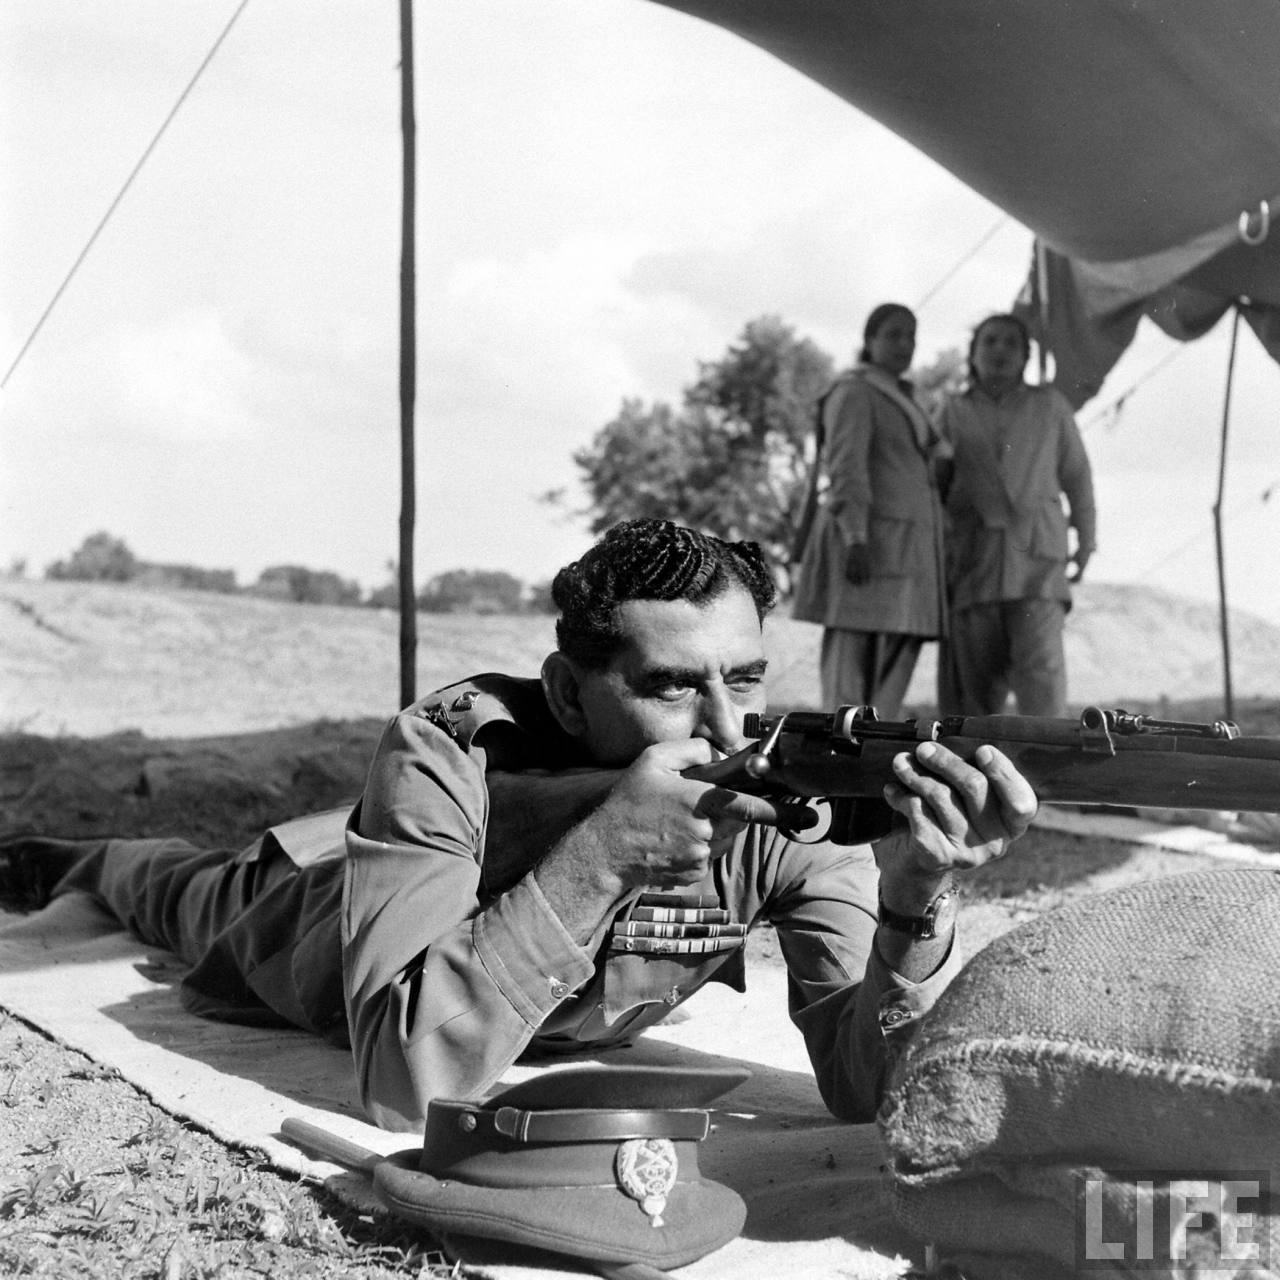 Major General Syed Ahmed El Edroos, Commander-in-Chief of the Hyderabad State Forces | Operation Polo | Hyderabad Police Action | Annexation of Hyderabad, Hyderabad (Deccan), Telangana, India | Rare & Old Vintage Photos of Operation Polo, Hyderabad (Deccan), Telangana, India (1948)